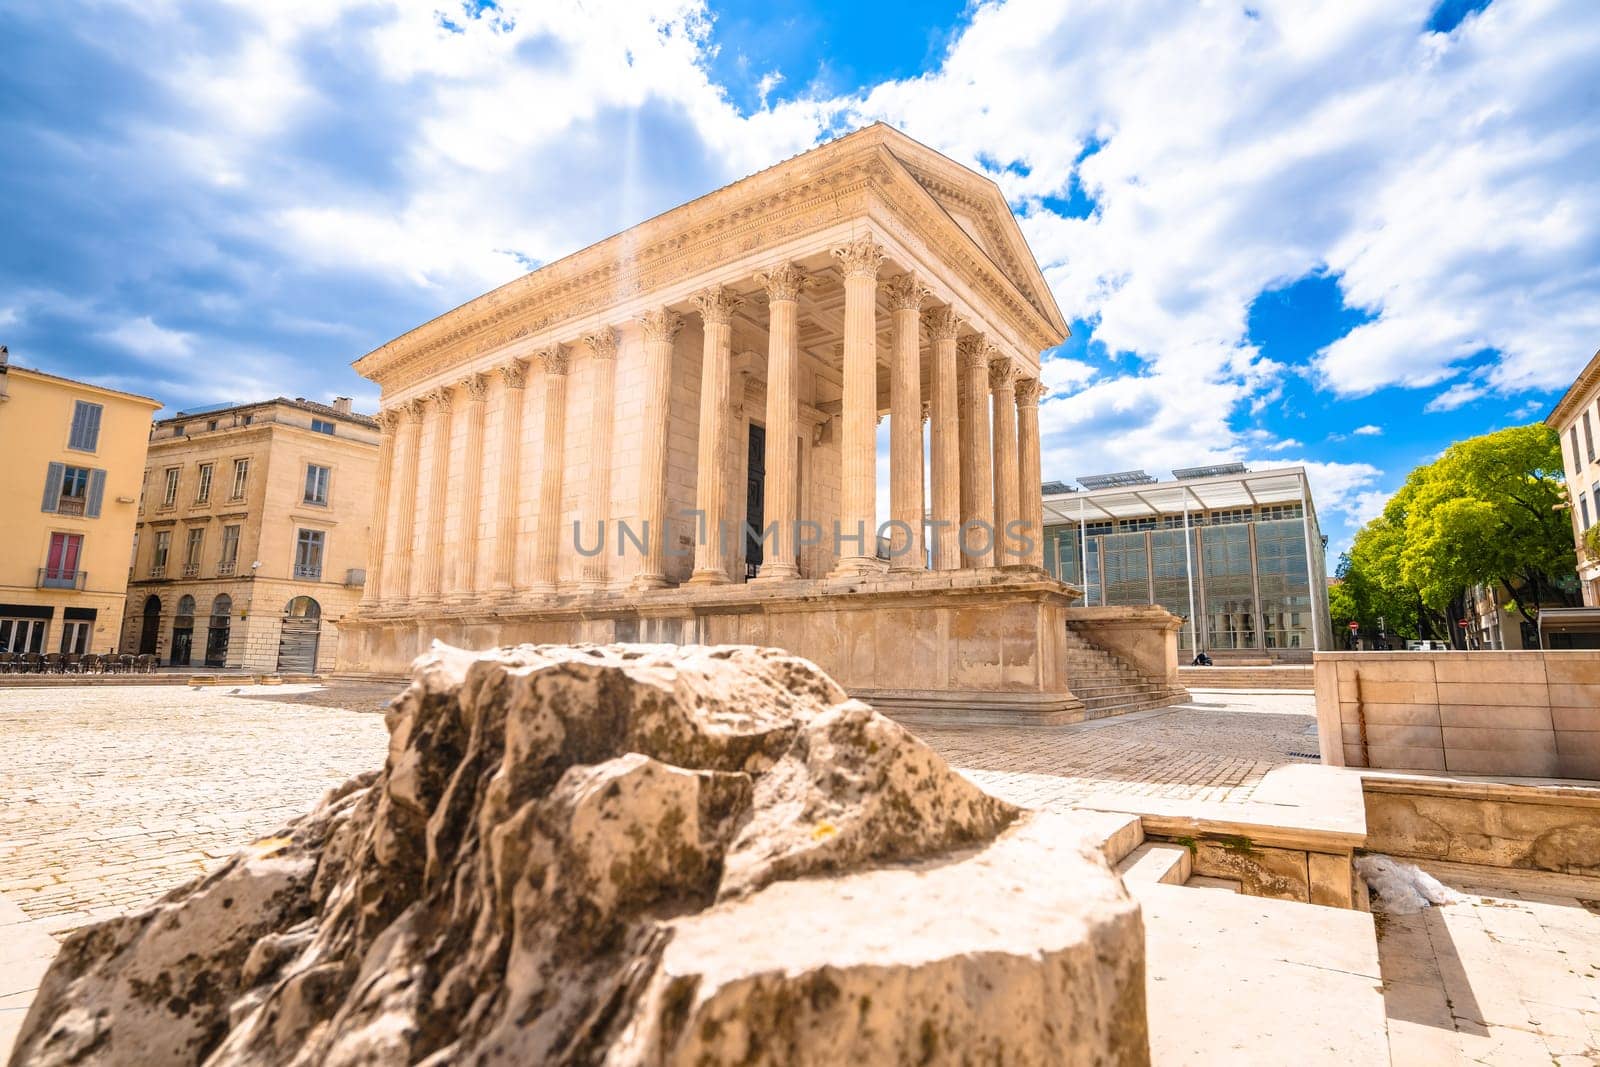 Maison Carree roman historic temple in Nimes street view by xbrchx